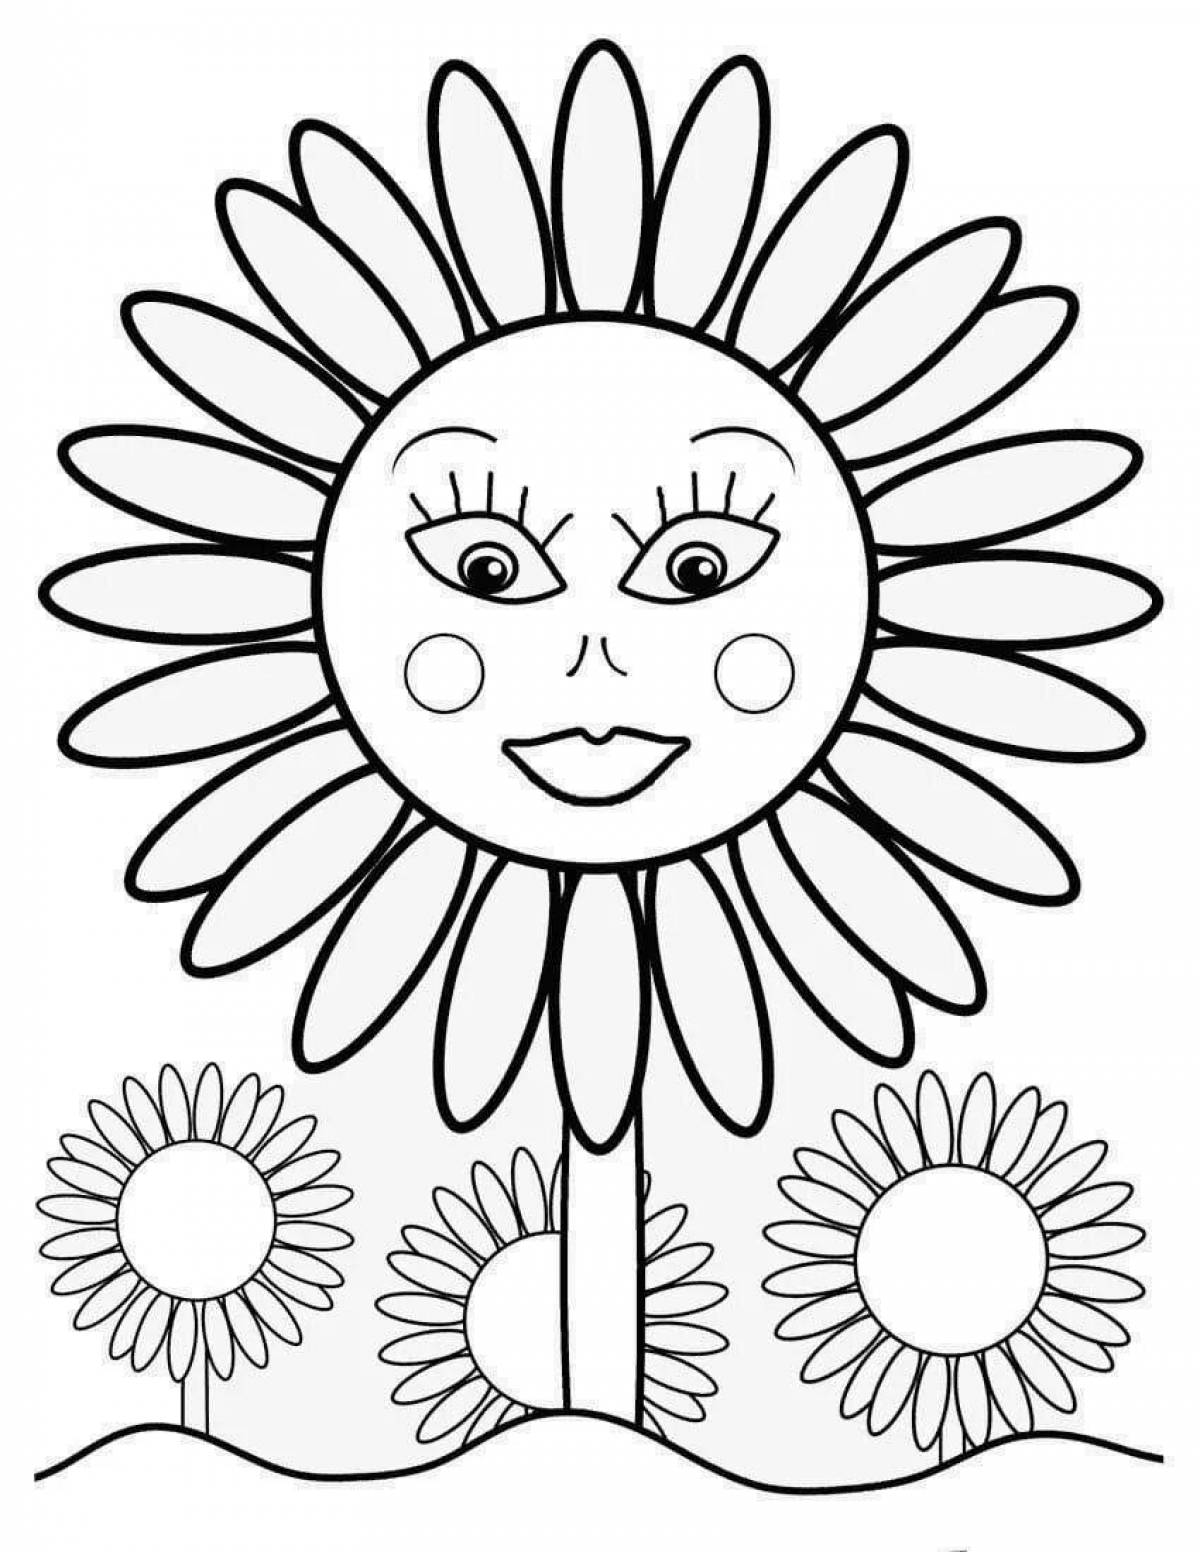 Coloring page glorious carnival sun